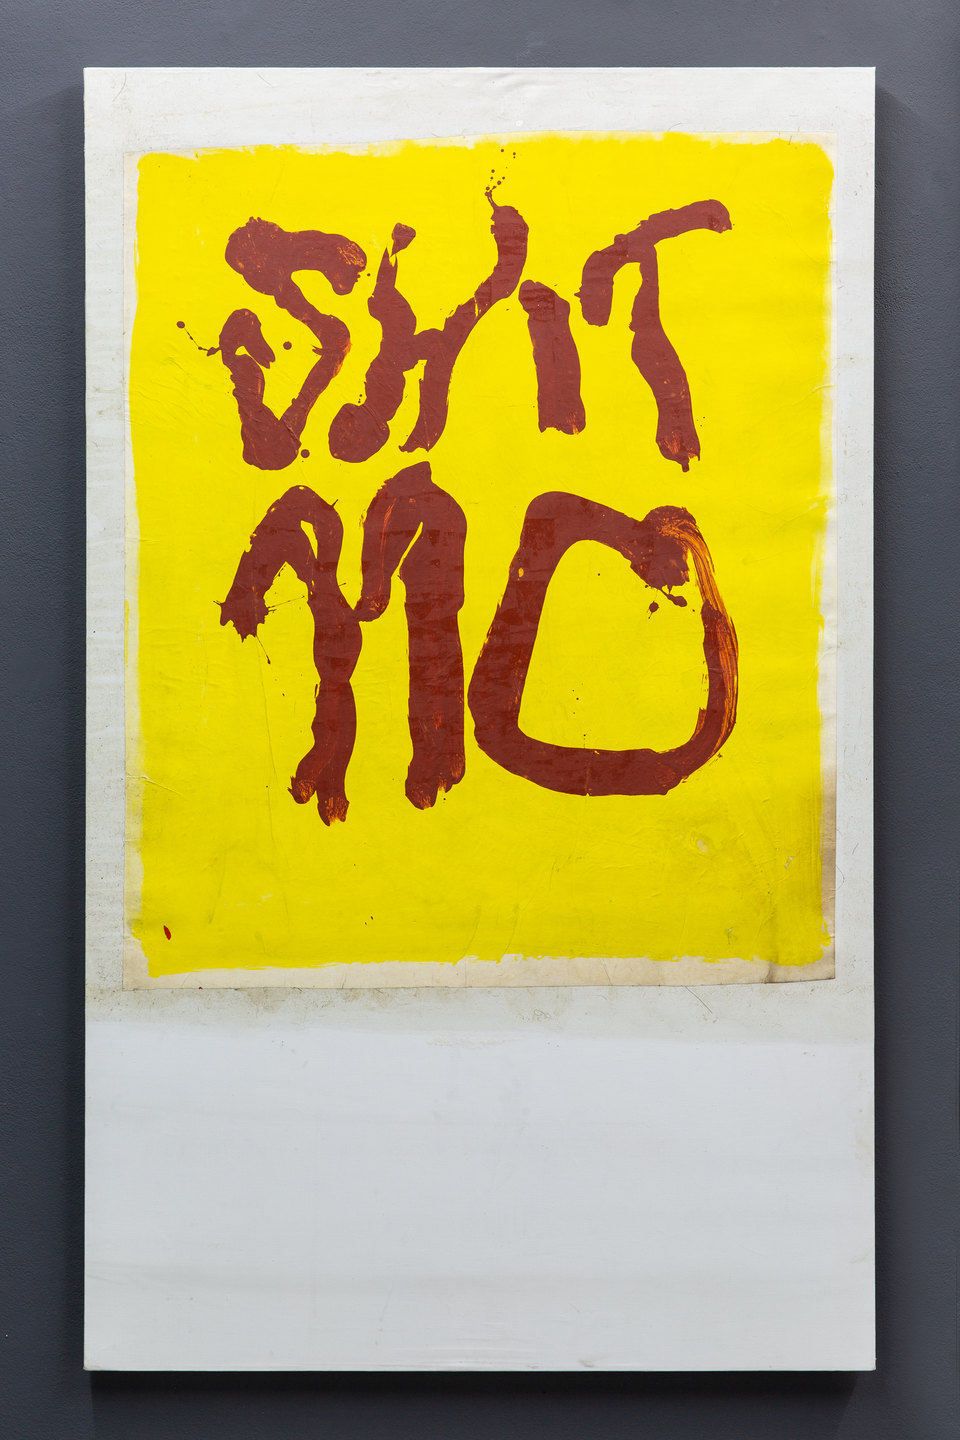 Boris Lurie, 'Shit NO', c. 1969, Shit and Doom - NO!art, 2019, Cell Project Space